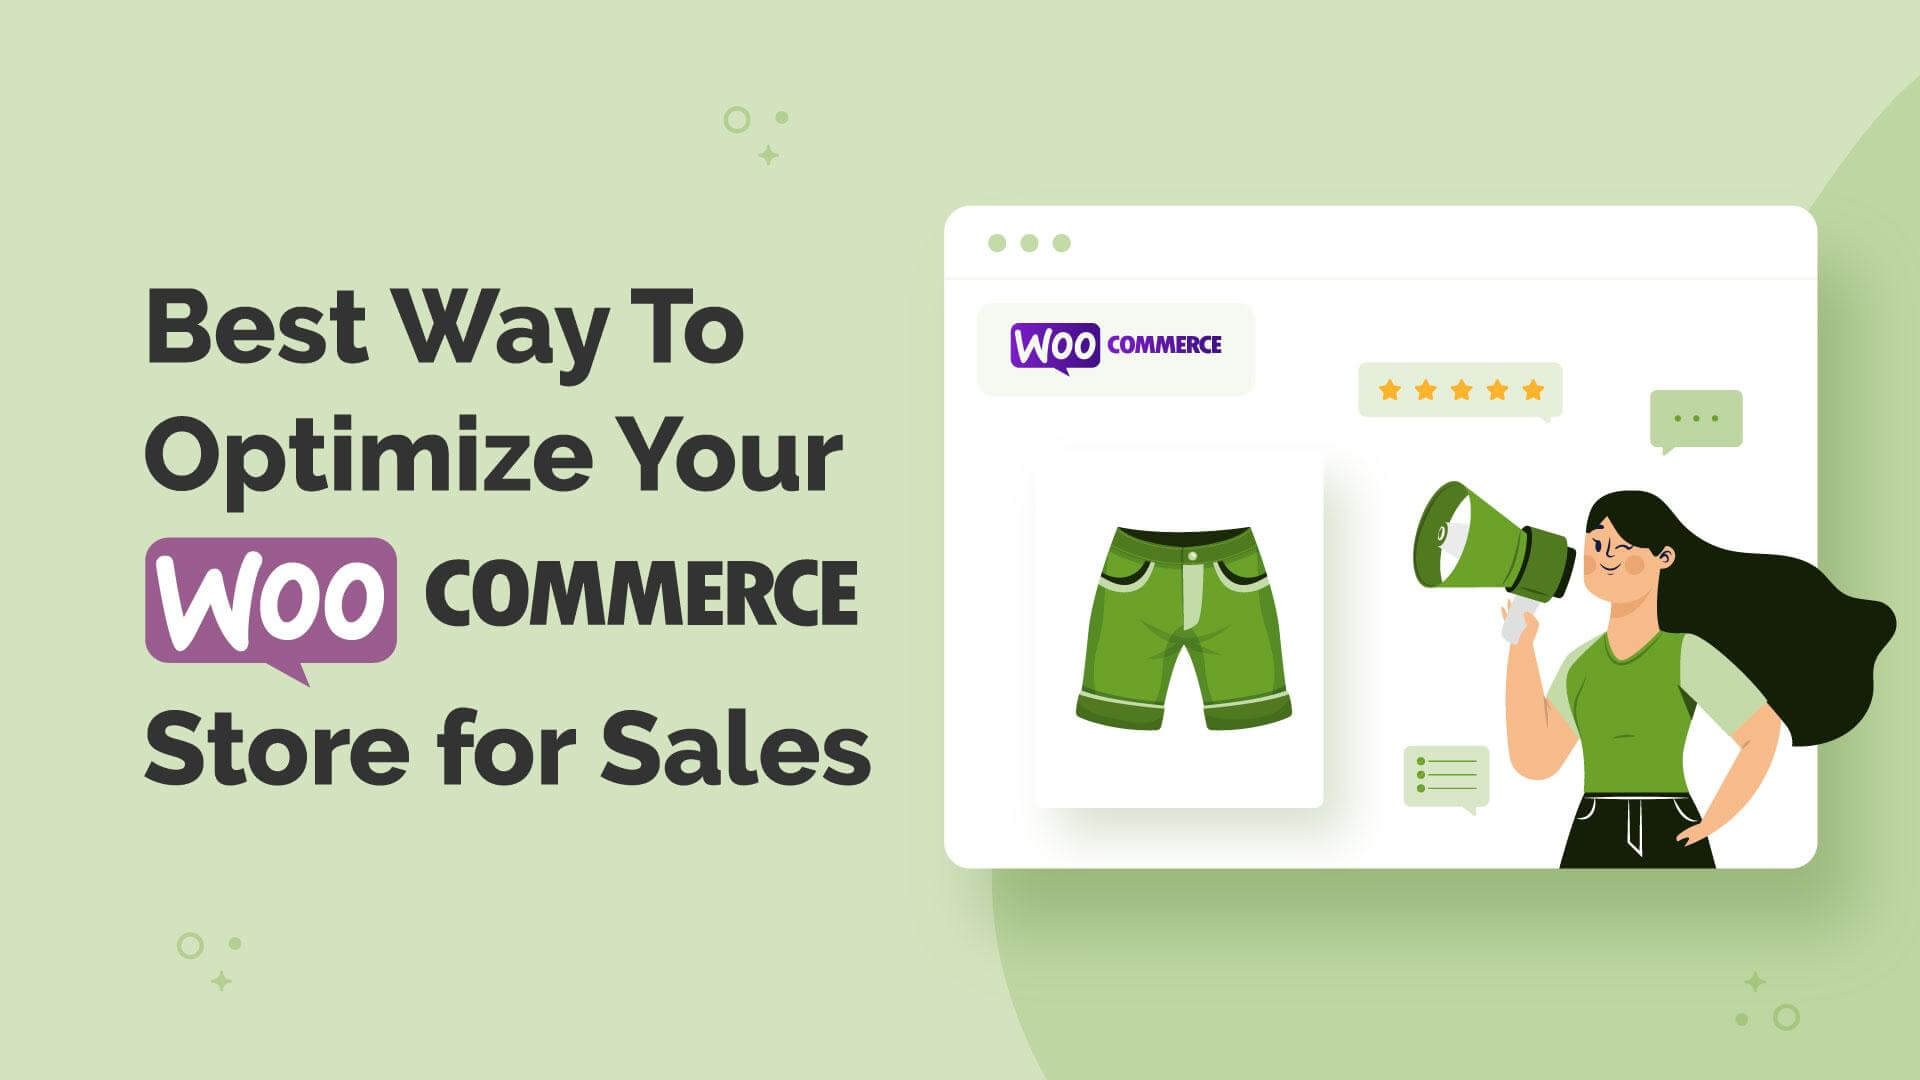 Best Way to Optimize Your WooCommerce Store for Sales